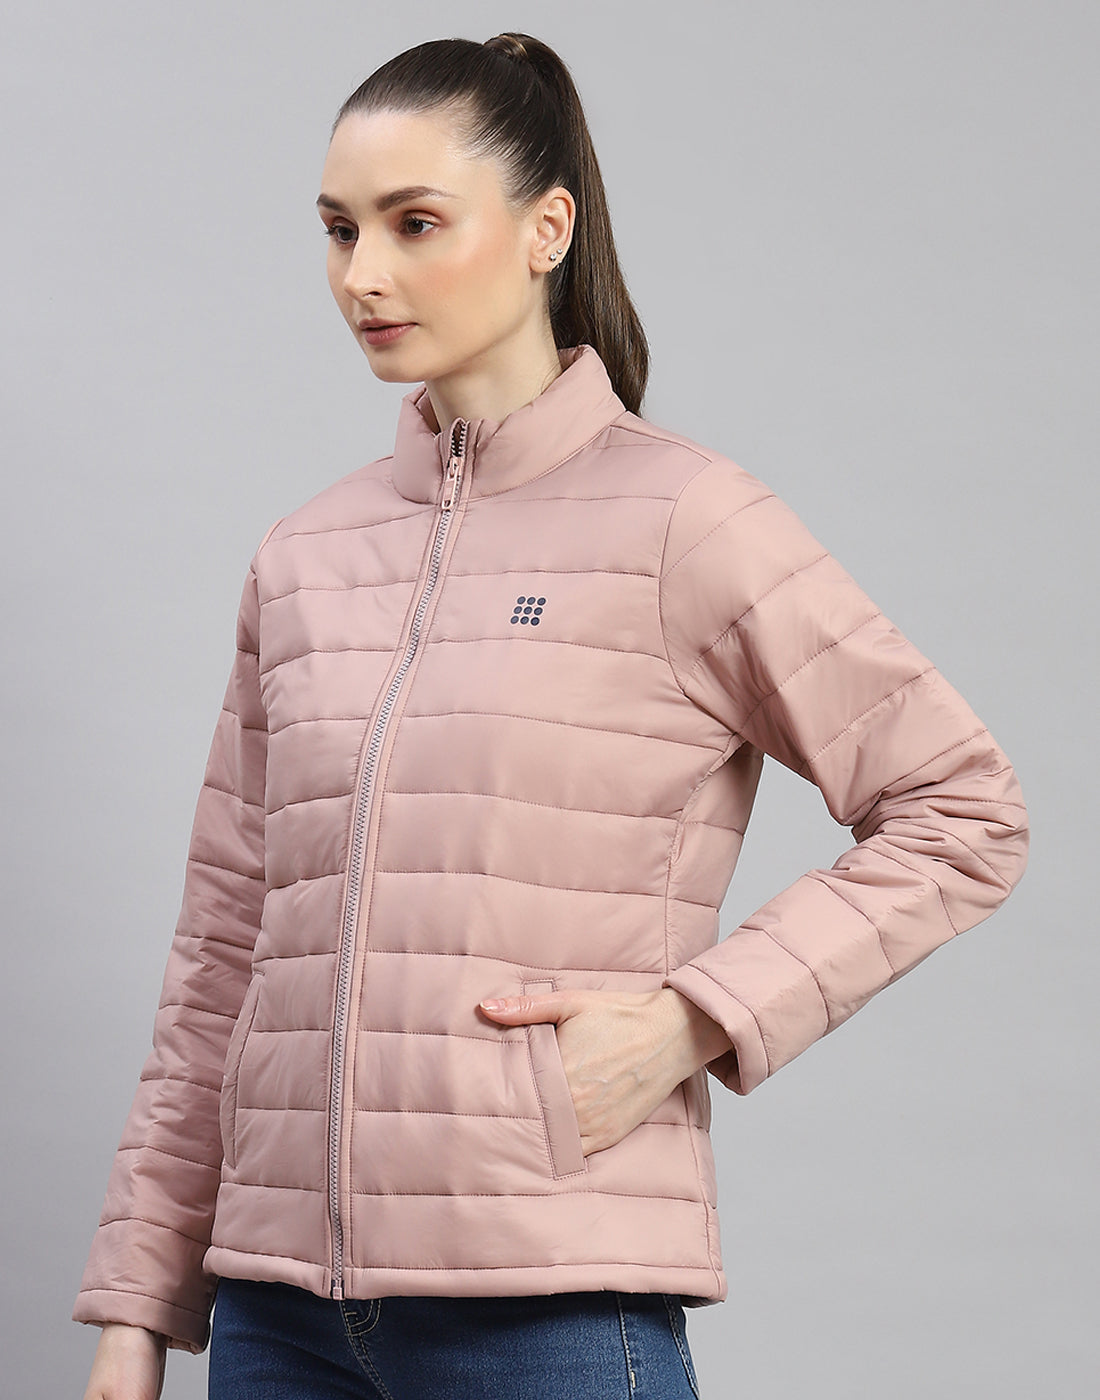 Women Peach Solid Stand Collar Full Sleeve Jacket